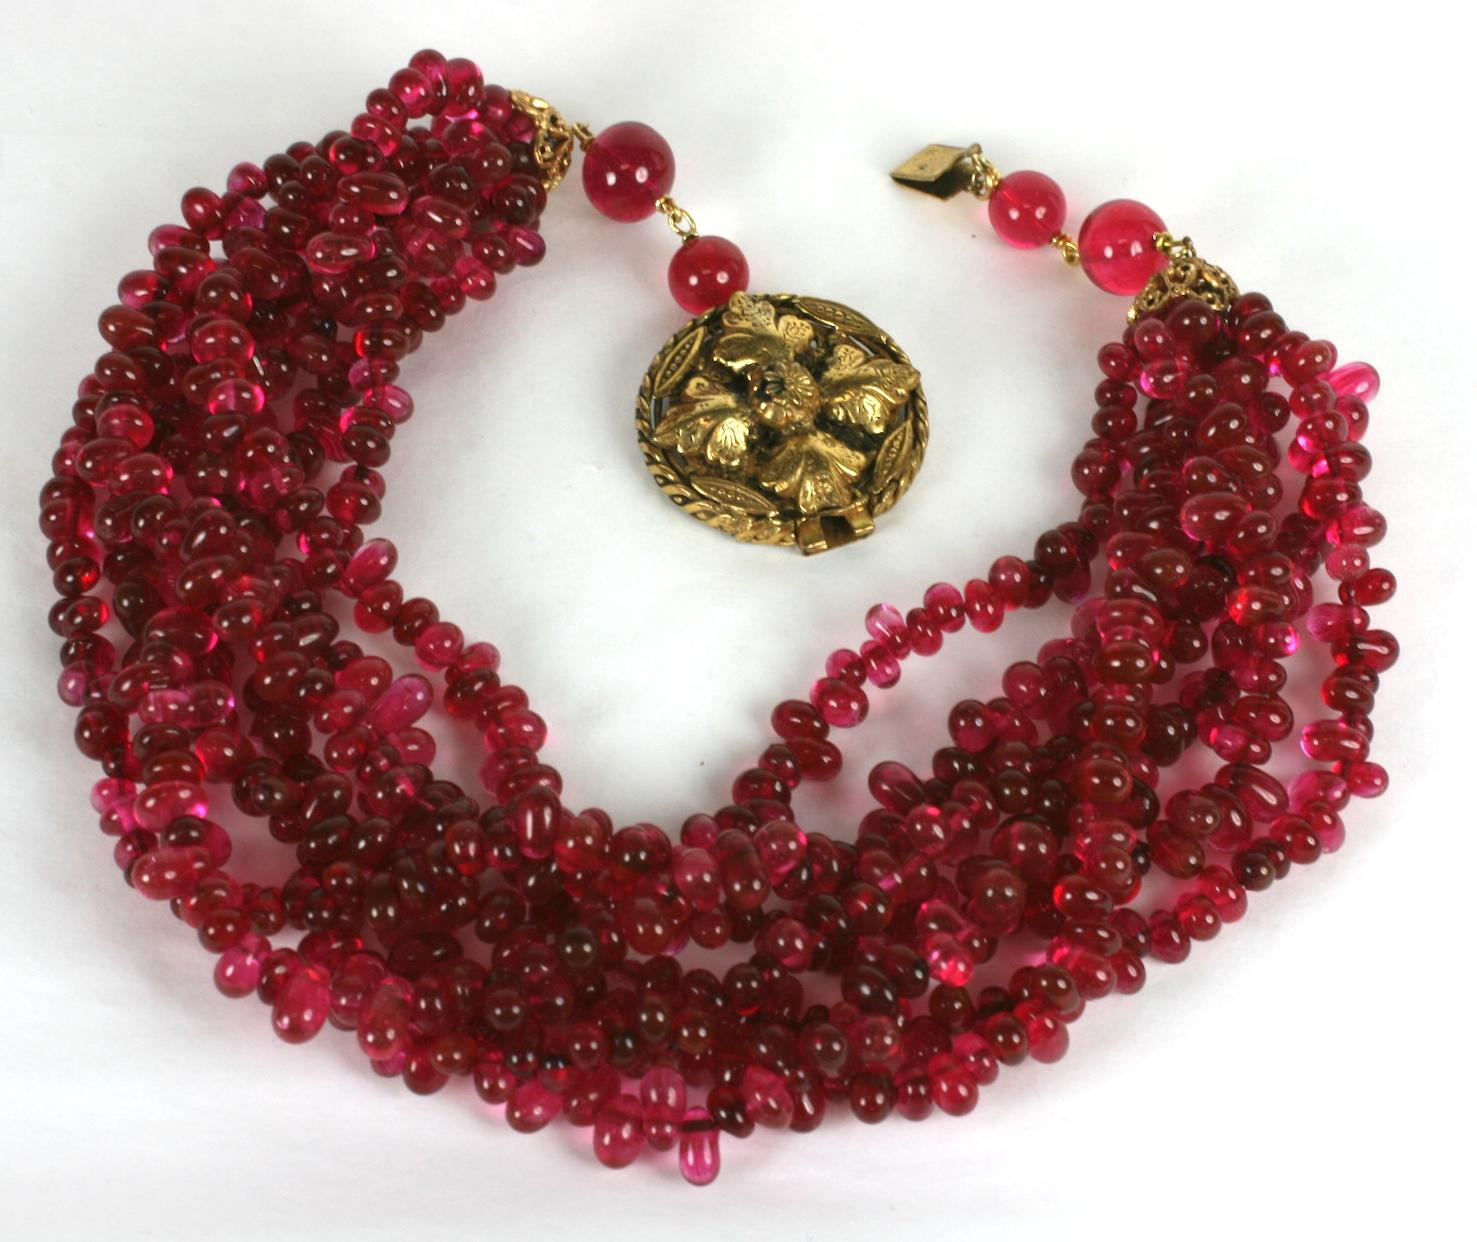  Karl Lagerfeld for Chanel 1983 Byzantine Ruby Pate de Verre Torsade Necklace  In Excellent Condition In New York, NY